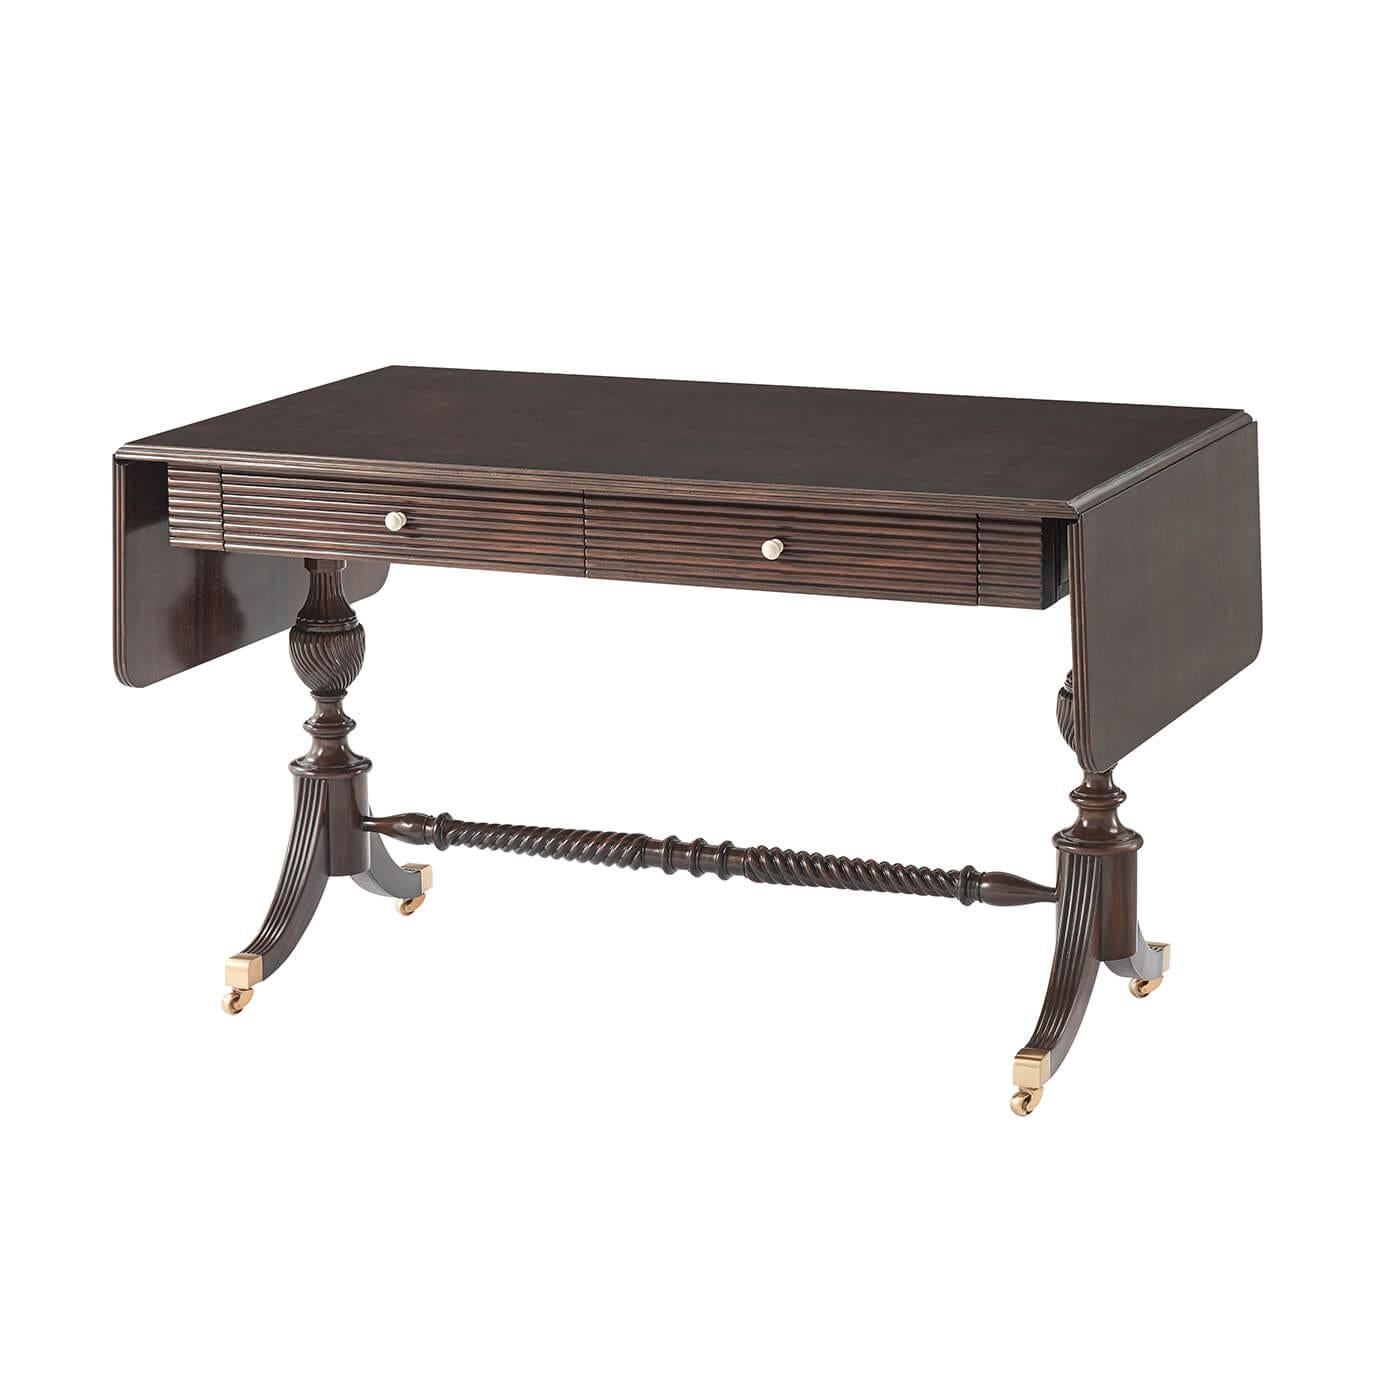 Inspired by the 19th Century age of exploration, this Regency Anglo Indian Style reeded-edge drop-leaf mahogany sofa table doubles as a writing table. The top is set on turned, reeded and spiral-carved balusters with down-swept legs, terminating in